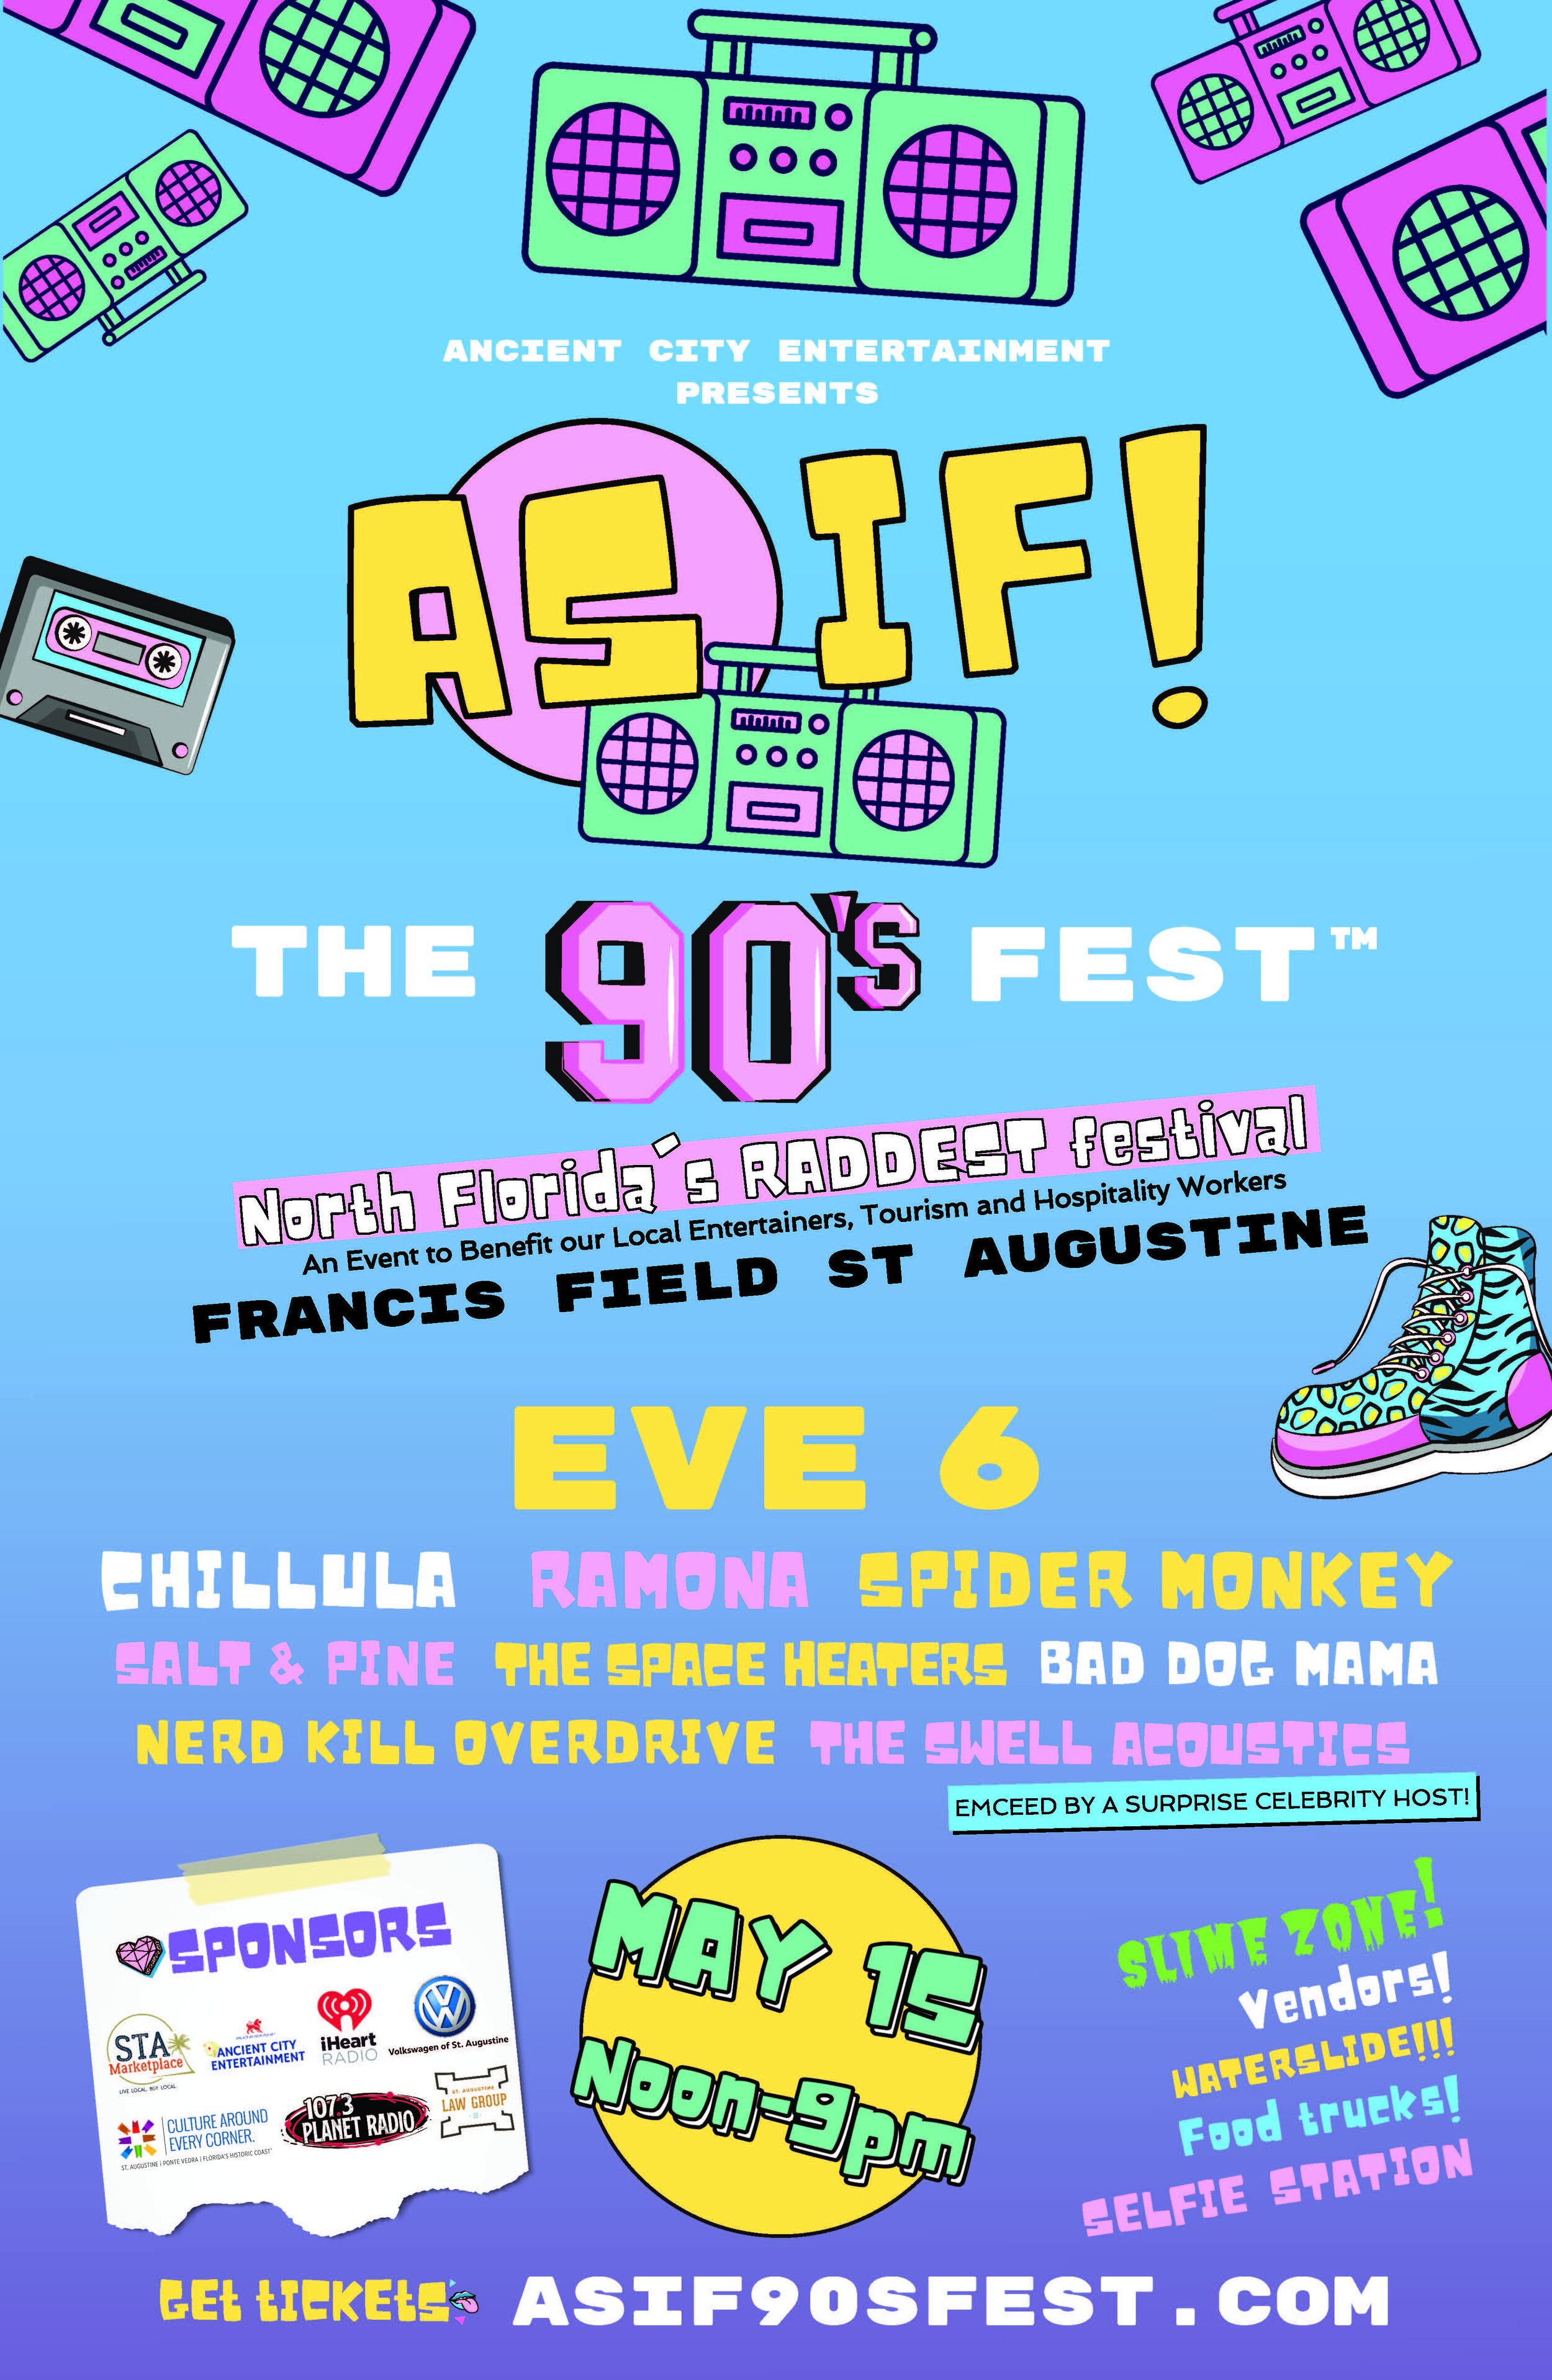 As If! The 90s Fest